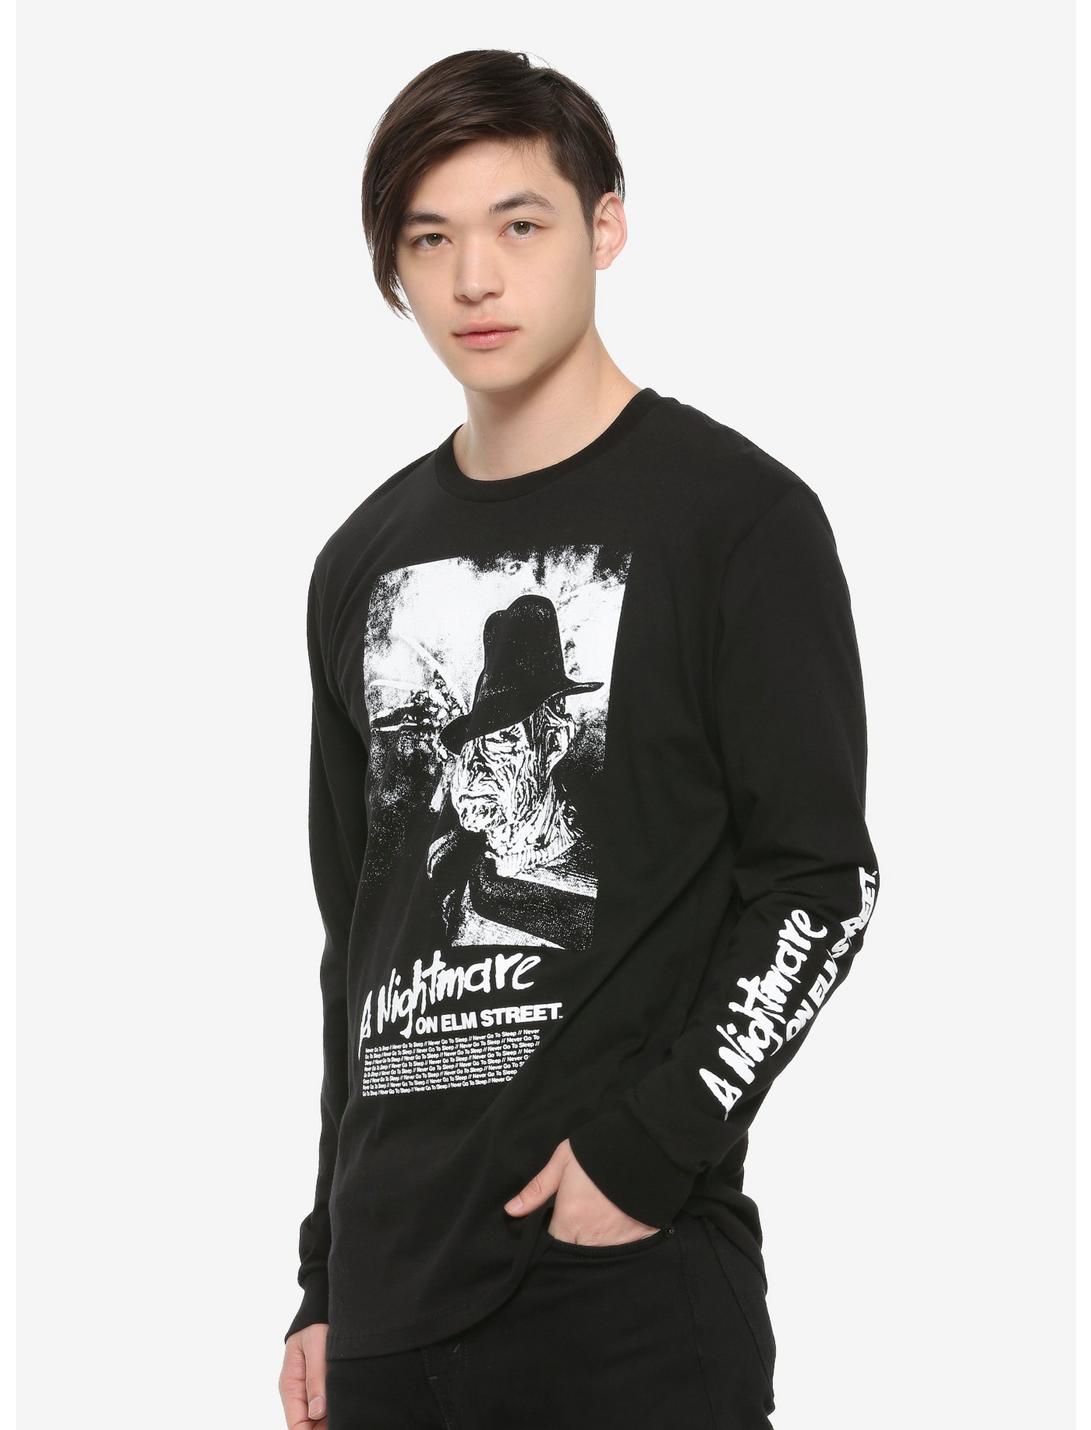 A Nightmare On Elm Street Black & White Freddy Long-Sleeve T-Shirt Hot Topic Exclusive, BLACK, hi-res